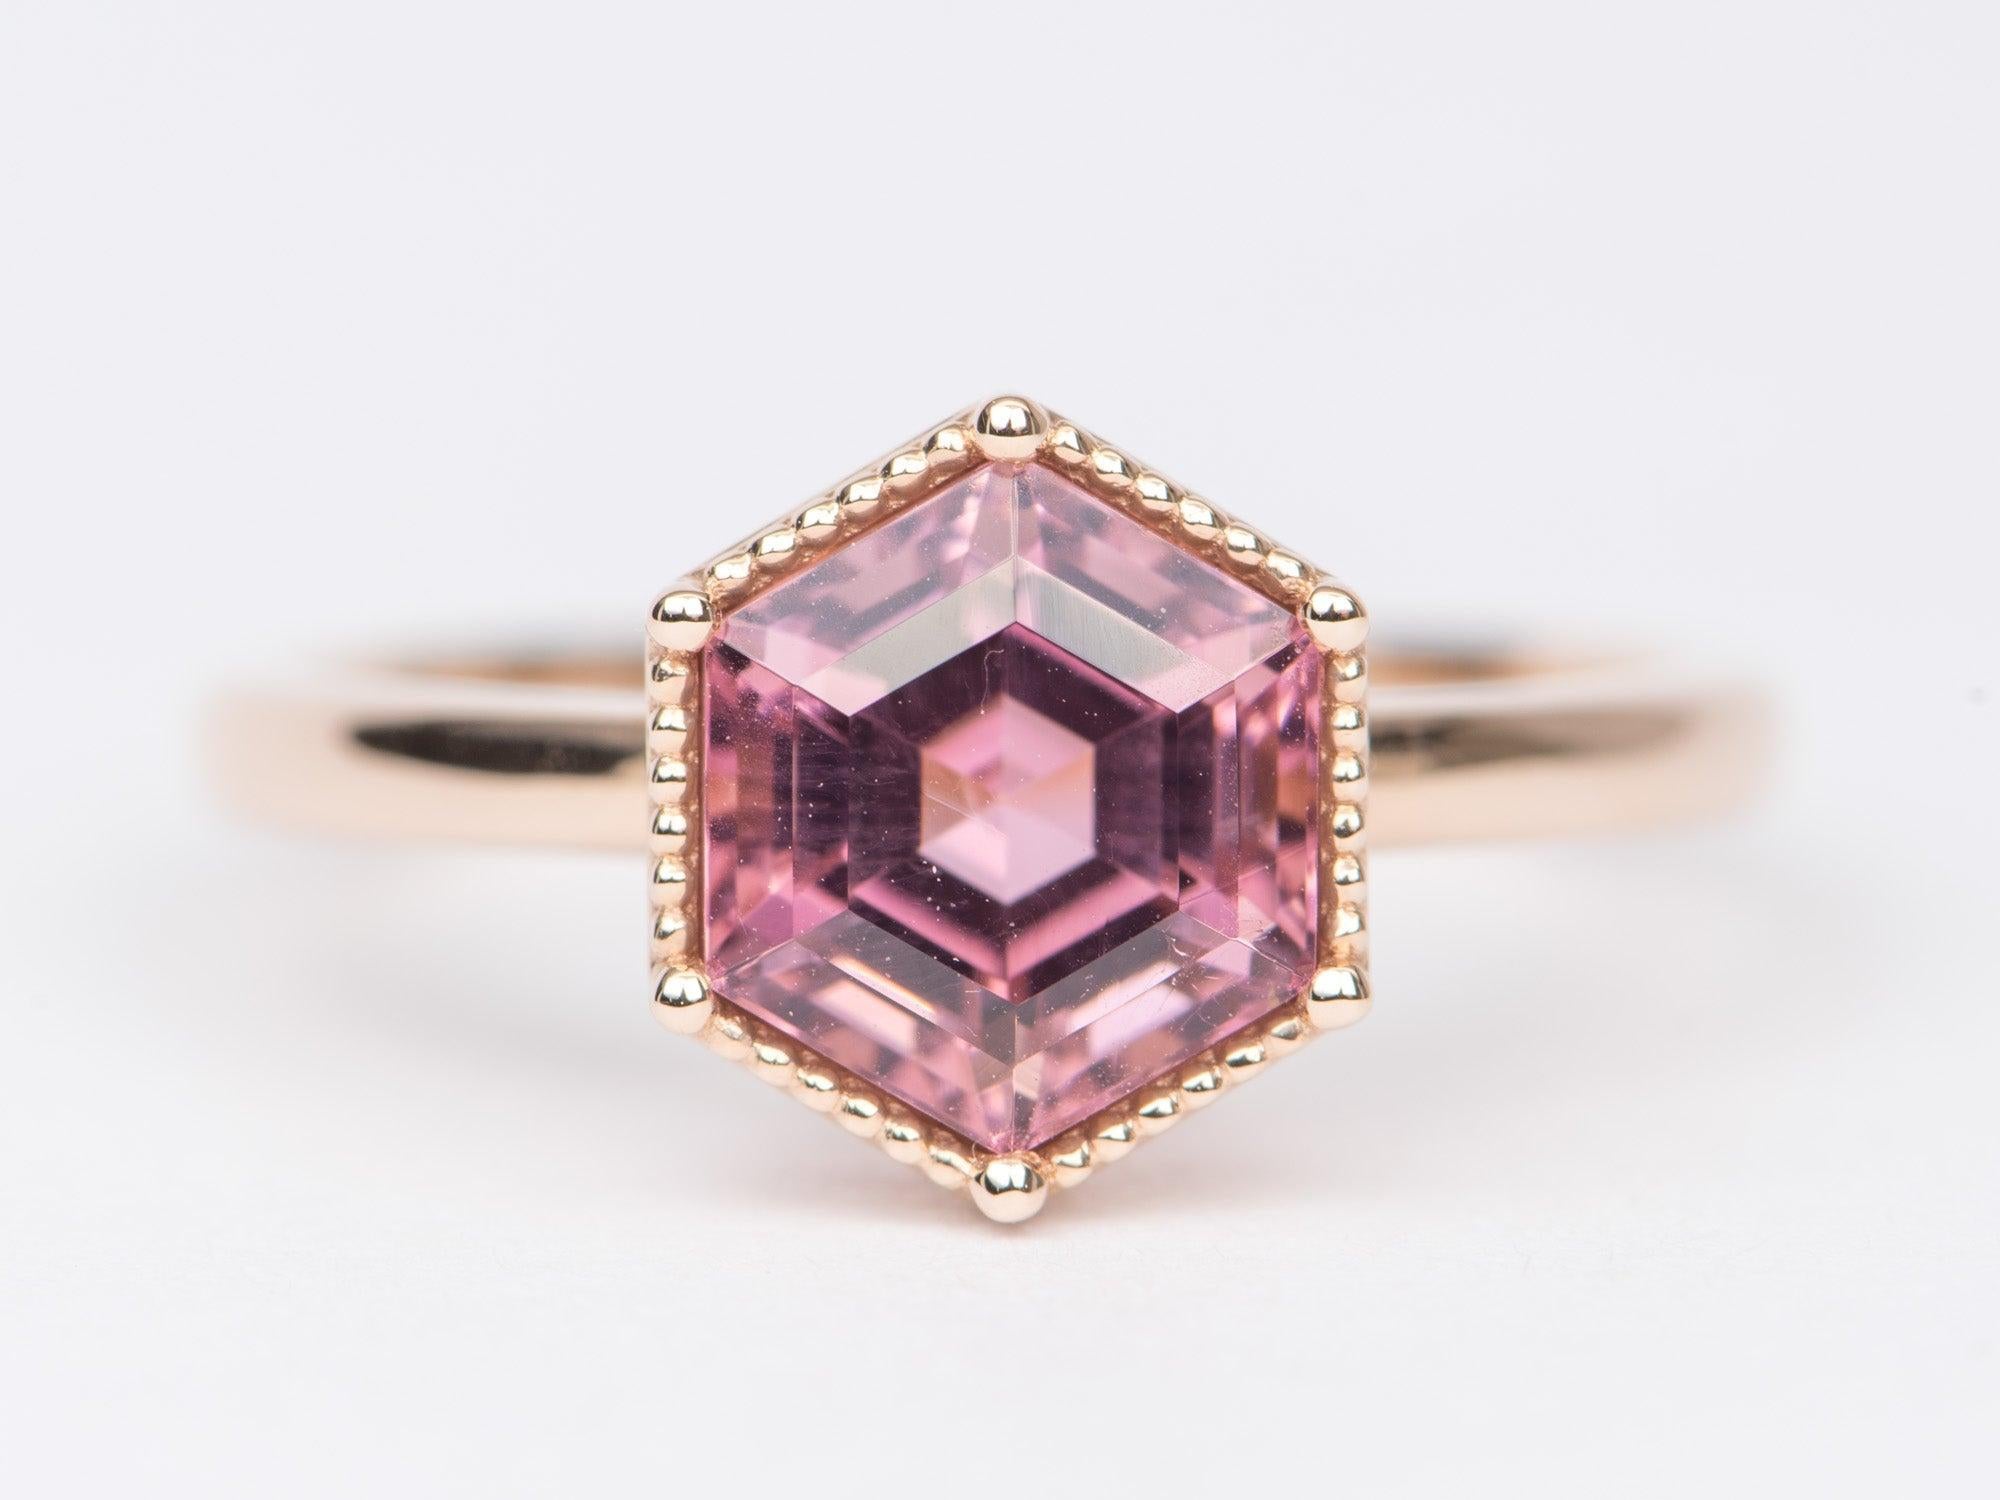 ♥ Solid 14k rose gold ring set with a beautiful hexagon-shaped tourmaline
♥ Gorgeous pink color!
♥ The item measures 10.5mm in length, 9.1mm in width, and stands 7.1mm from the finger

♥ US Size 7 (Free resizing up or down 1 size)
♥ Band width: